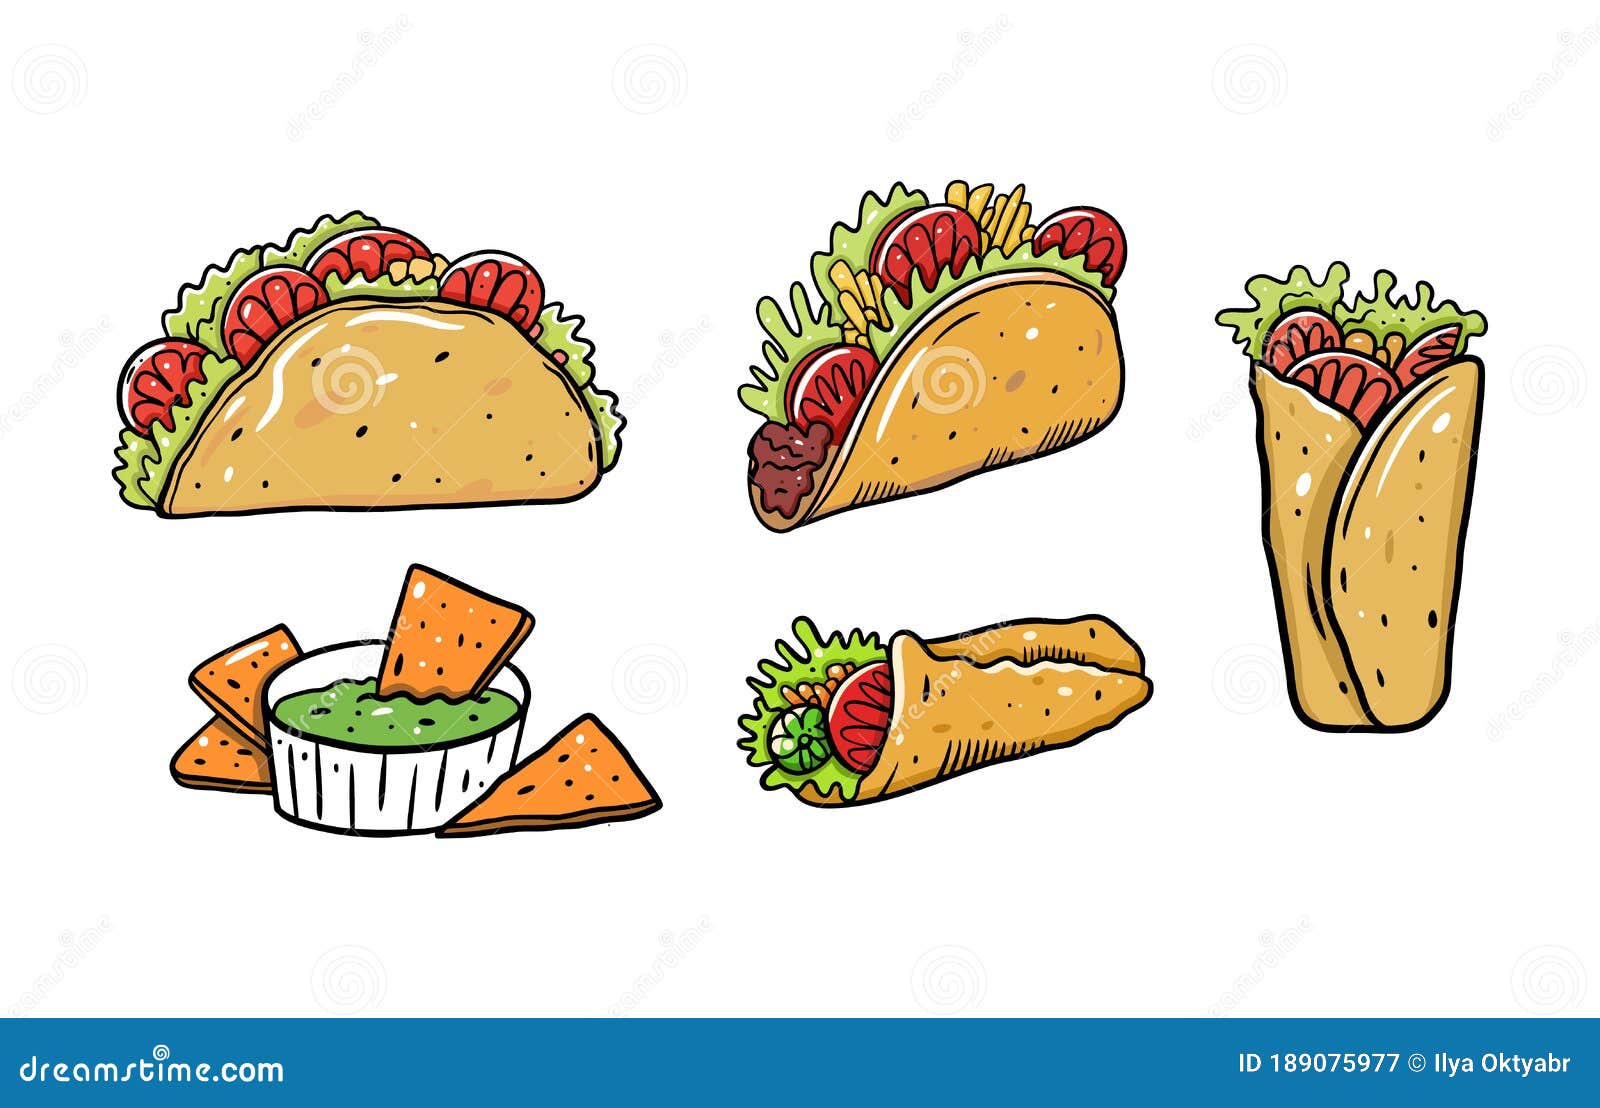 Mexican Food Set. Burrito, Taco and Nachos. Cartoon Vector Illustration.  Isolated on White Background Stock Vector - Illustration of chili, avocado:  189075977